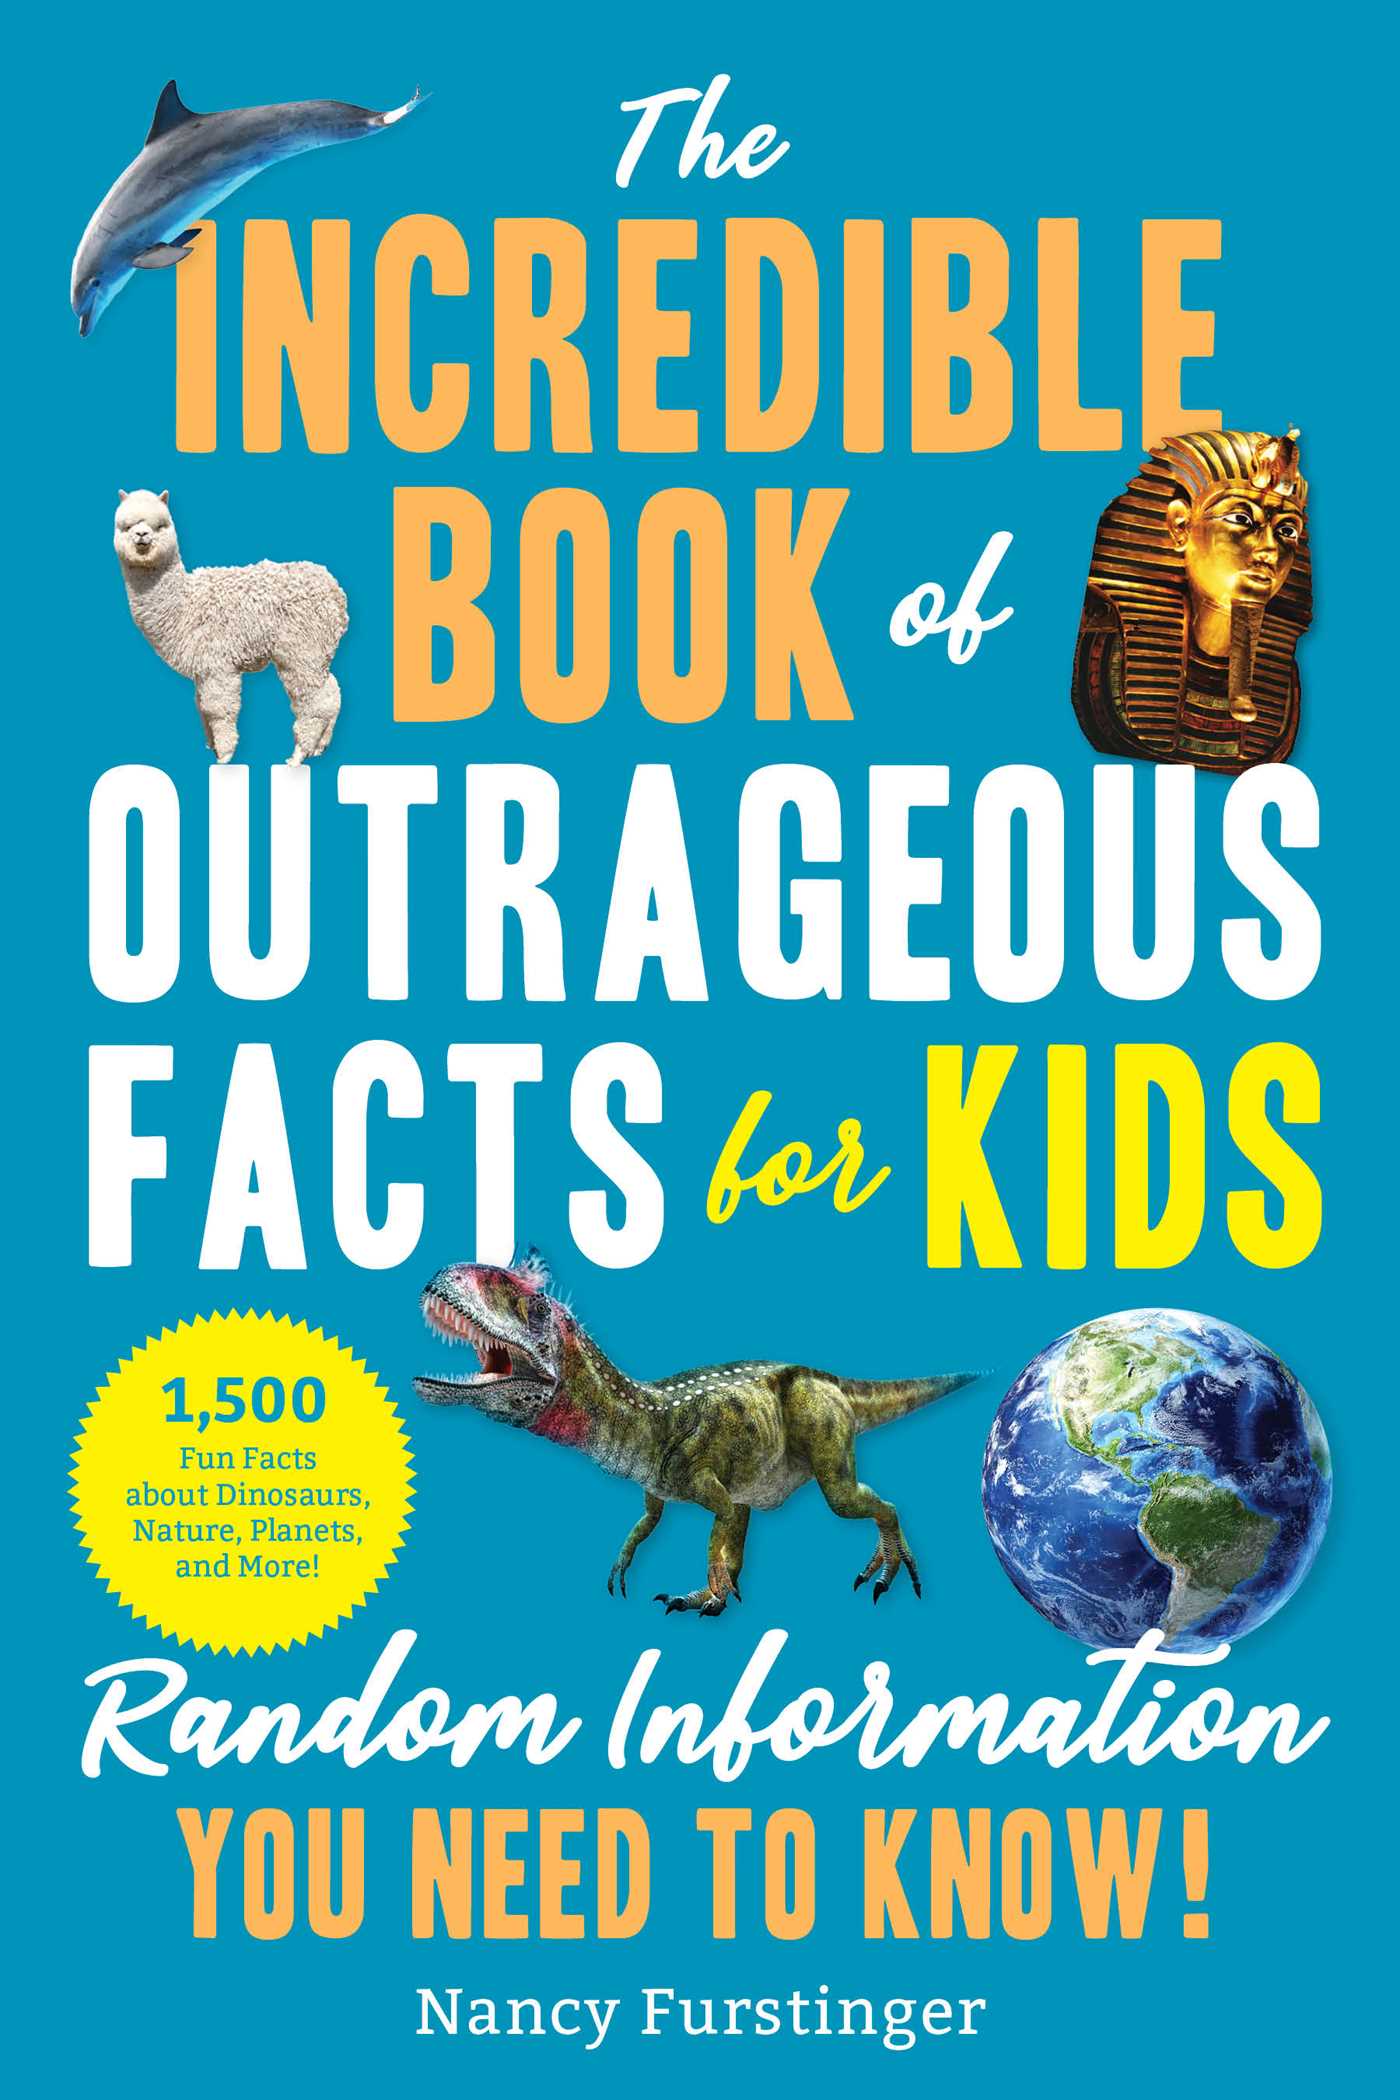 THE INCREDIBLE BOOK OF OUTRAGEOUS FACTS FOR KIDS, by FURSTINGER , NANCY